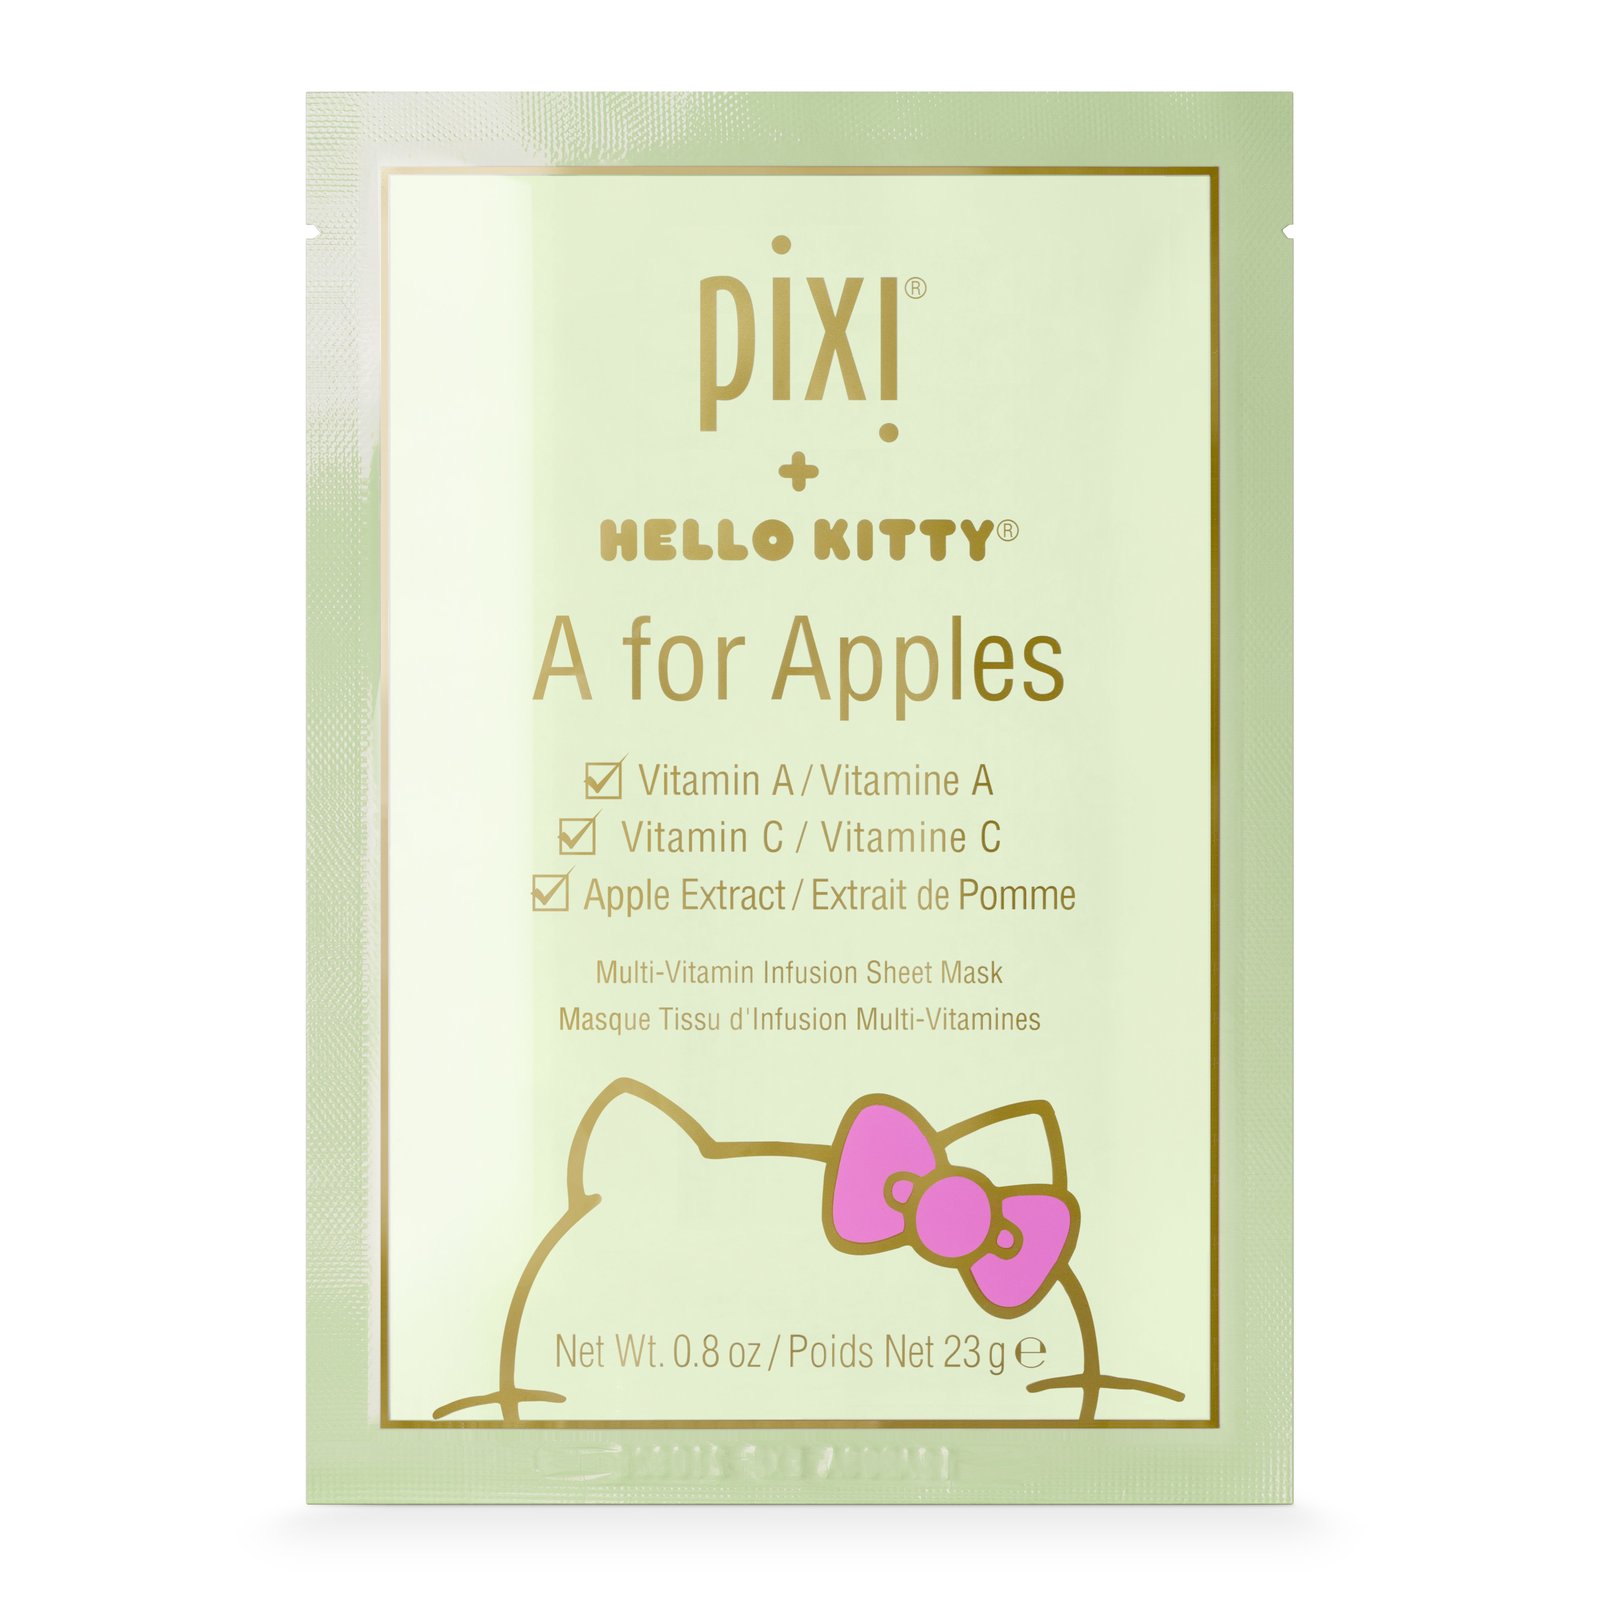 Pixi + Hello Kitty A for Apples Sheetmask 3 st